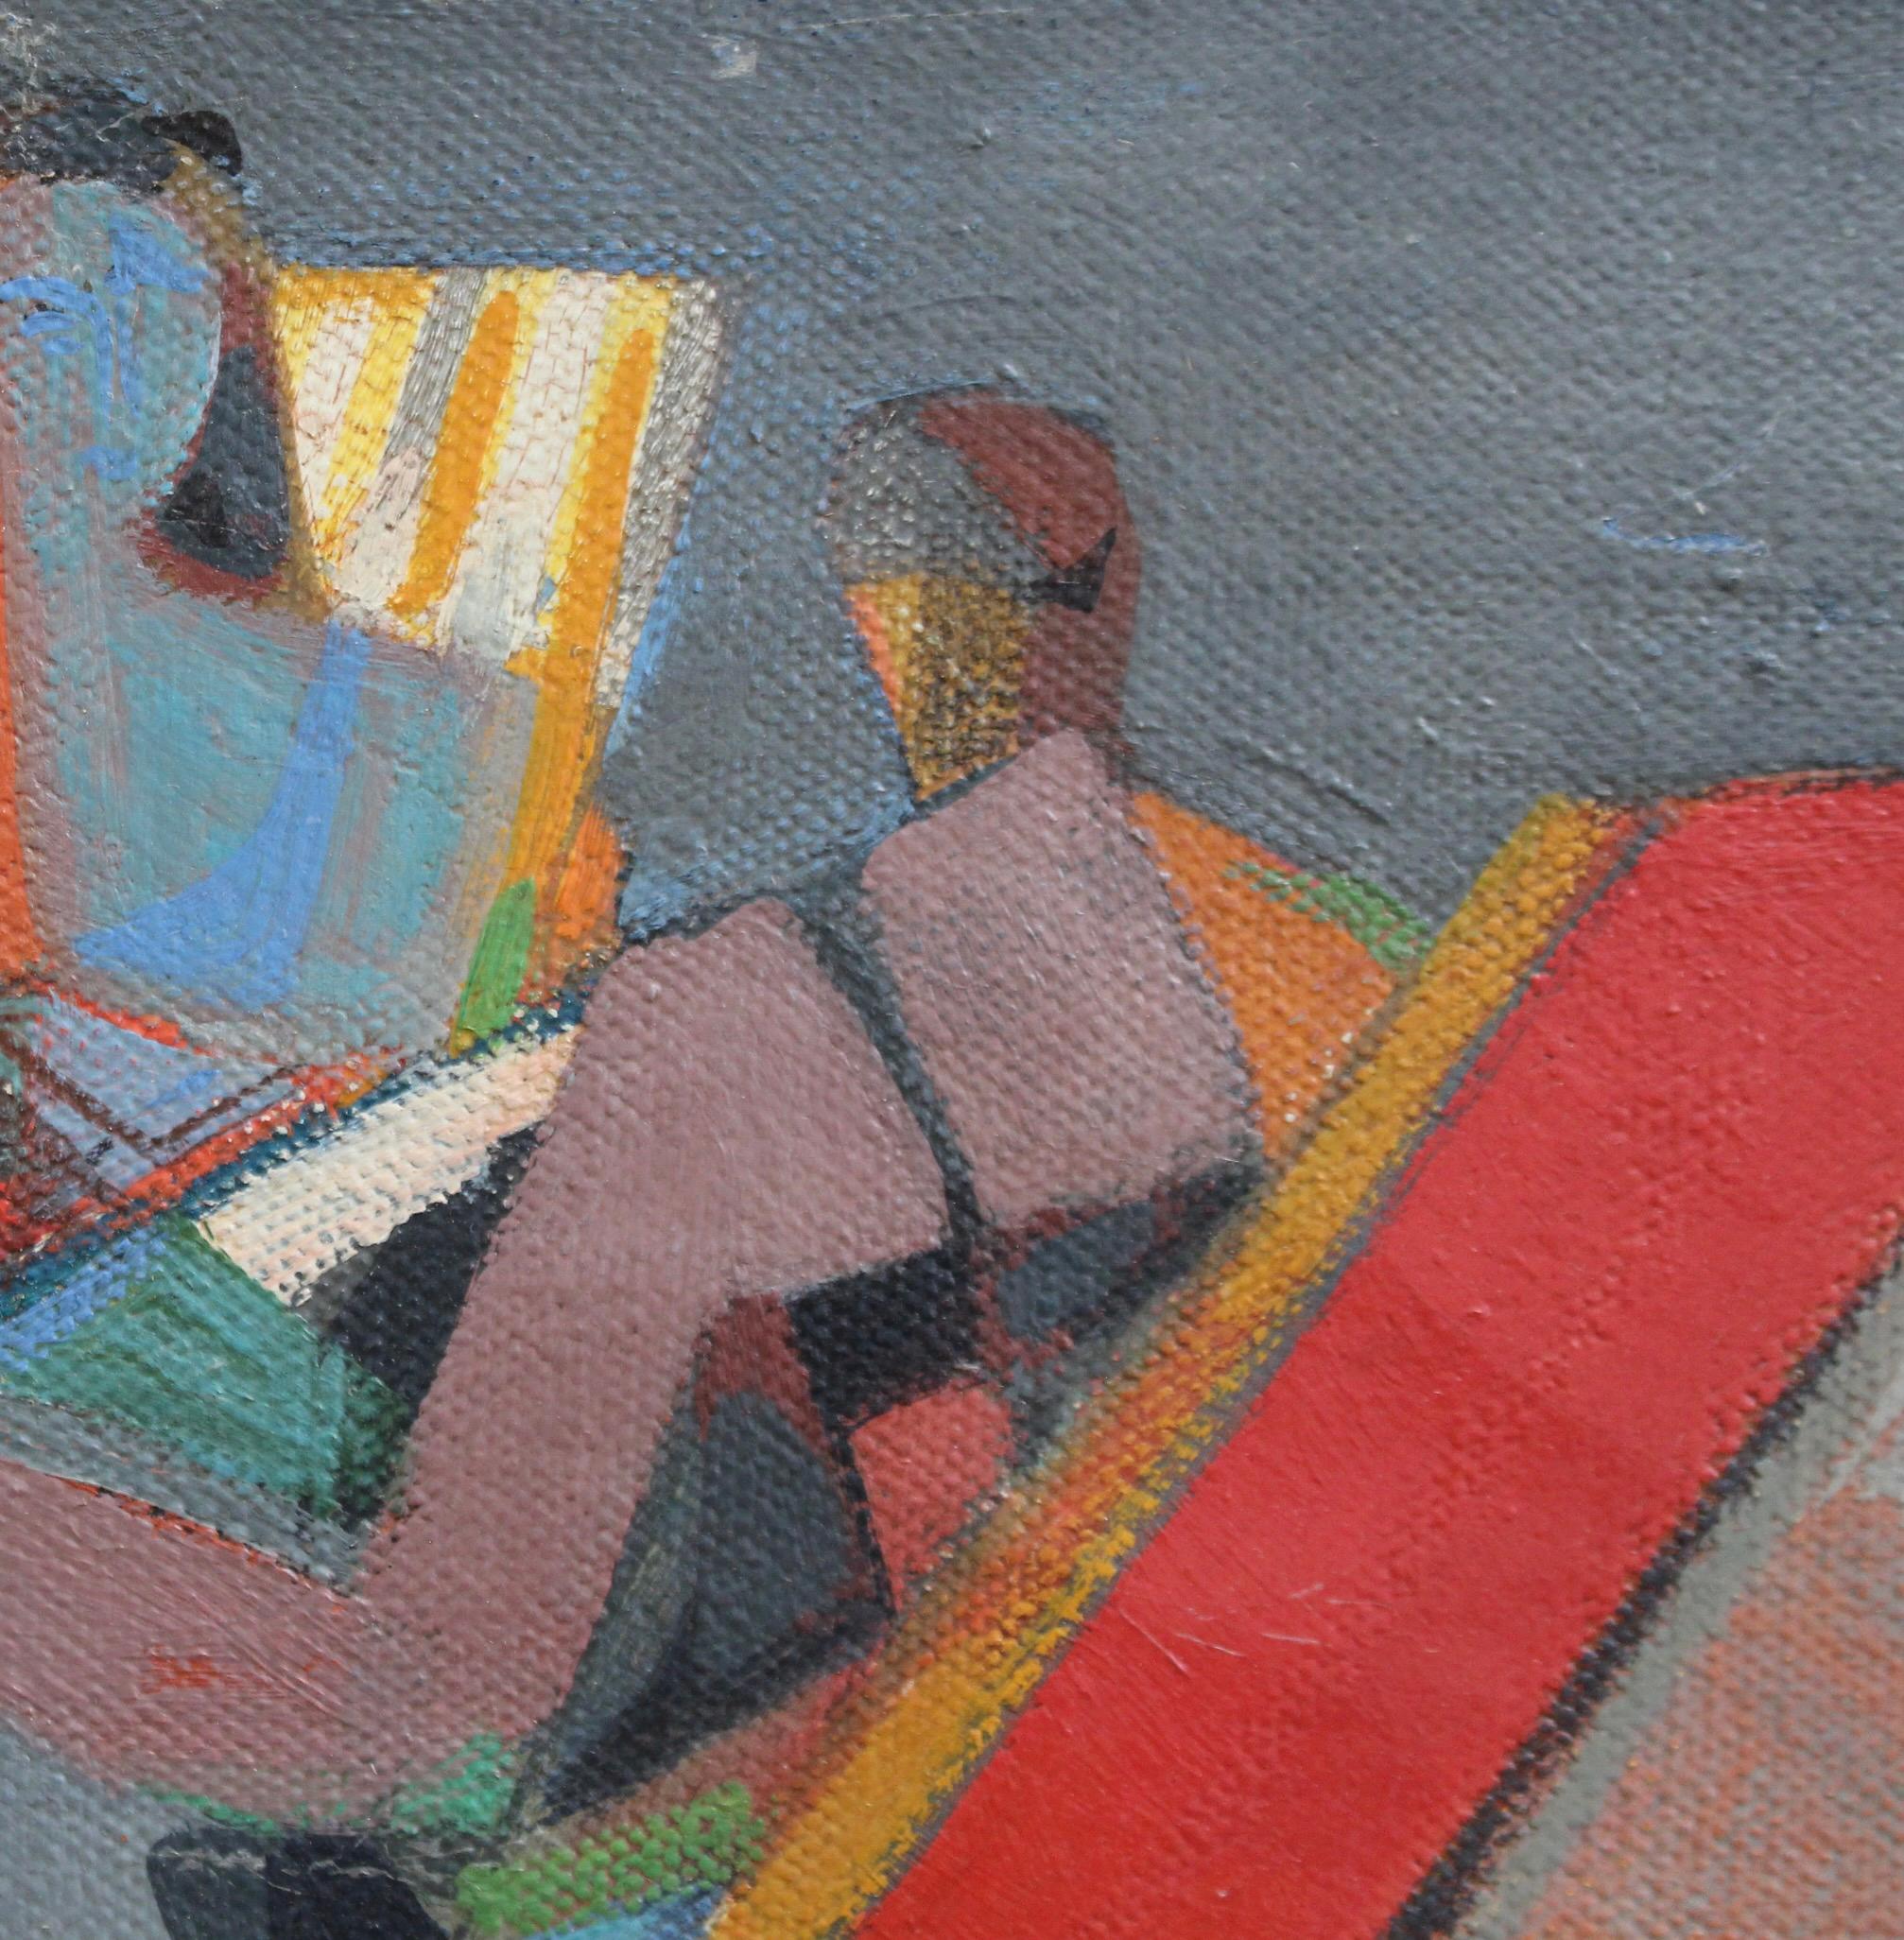 Women in Deckchairs - Brown Abstract Painting by Camille Hilaire